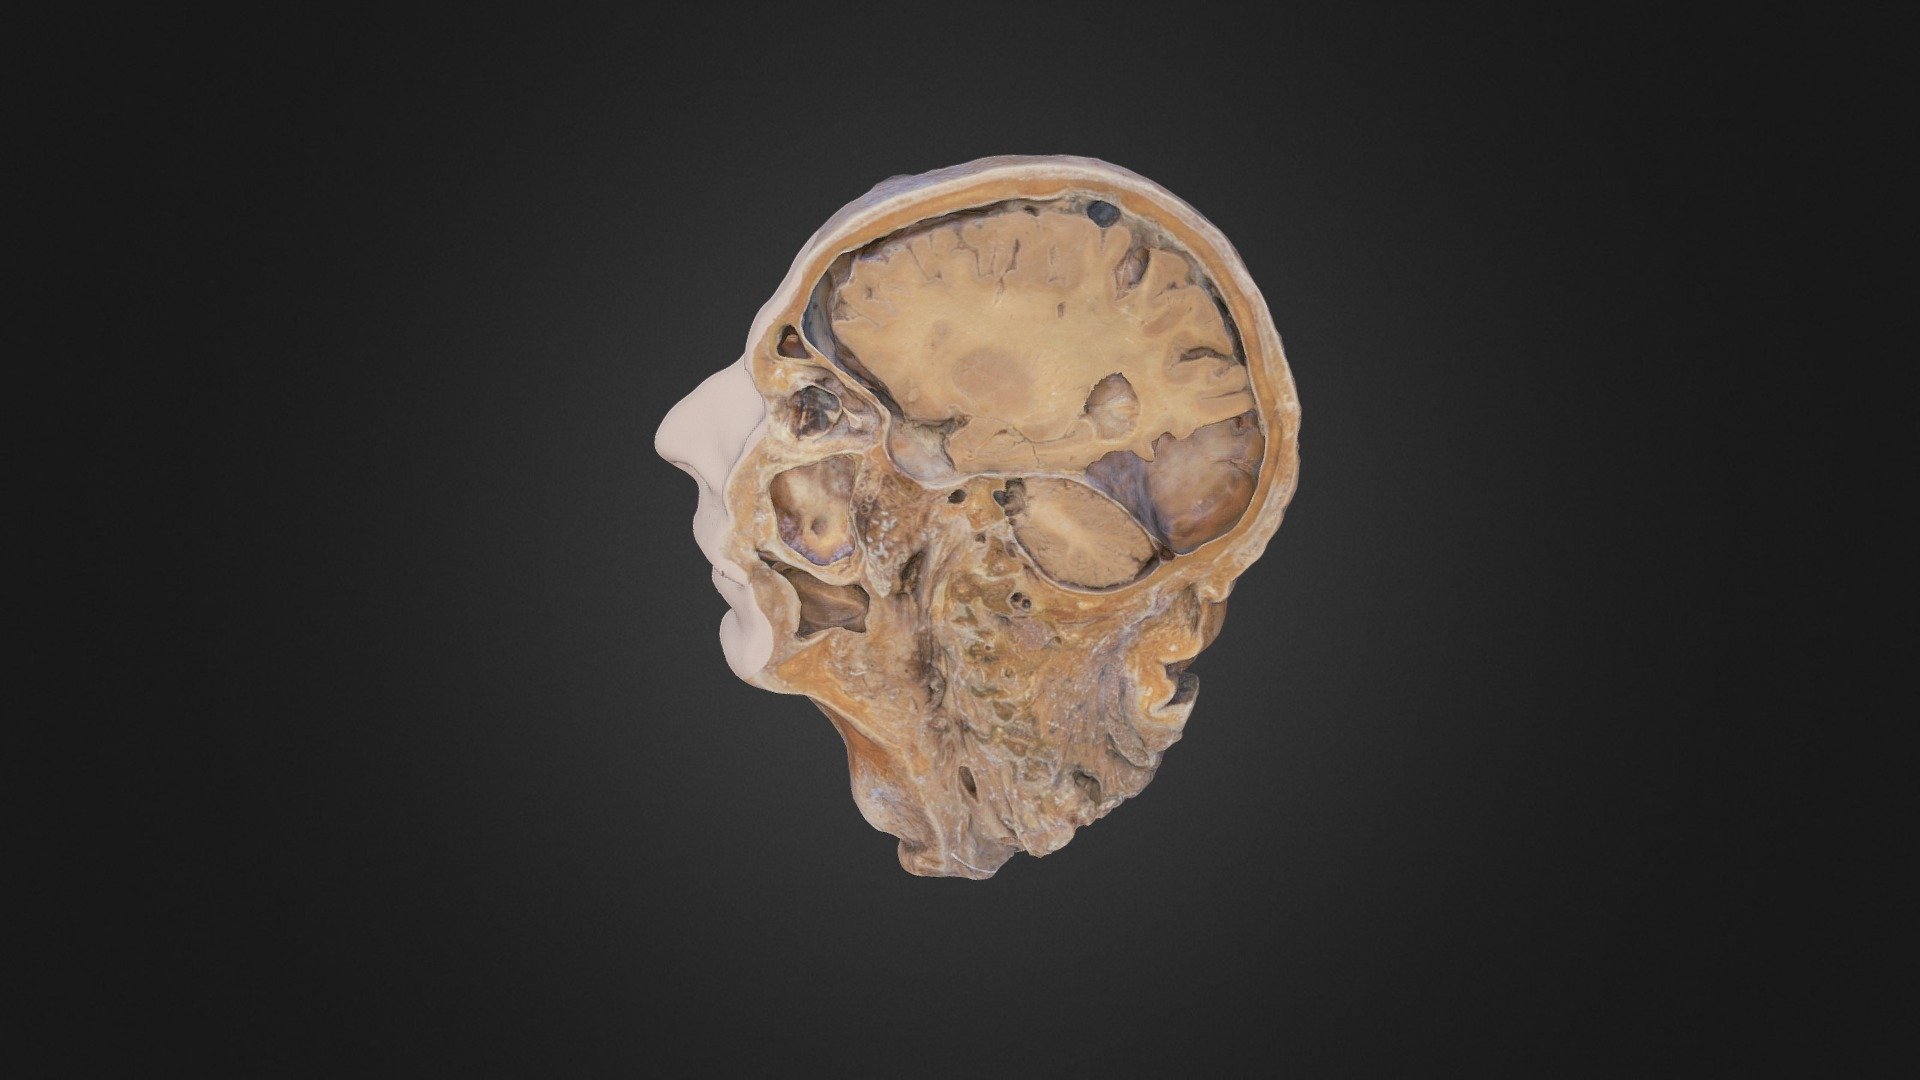 A plastinated midsagittal section of the head. 

For more on the head and neck, visit: https://clinicalanatomy.ca/head.html

Produced by UBC HIVE using Reality Capture and Artec Studio 13.

Credits:




Dr. Claudia Krebs (Faculty Lead) 


Photogrammetry: Connor Dunne

Laser scanning: Ishan Dixit
 - Midsagittal Section of Human Head - 3D model by UBC Medicine - Educational Media 3d model